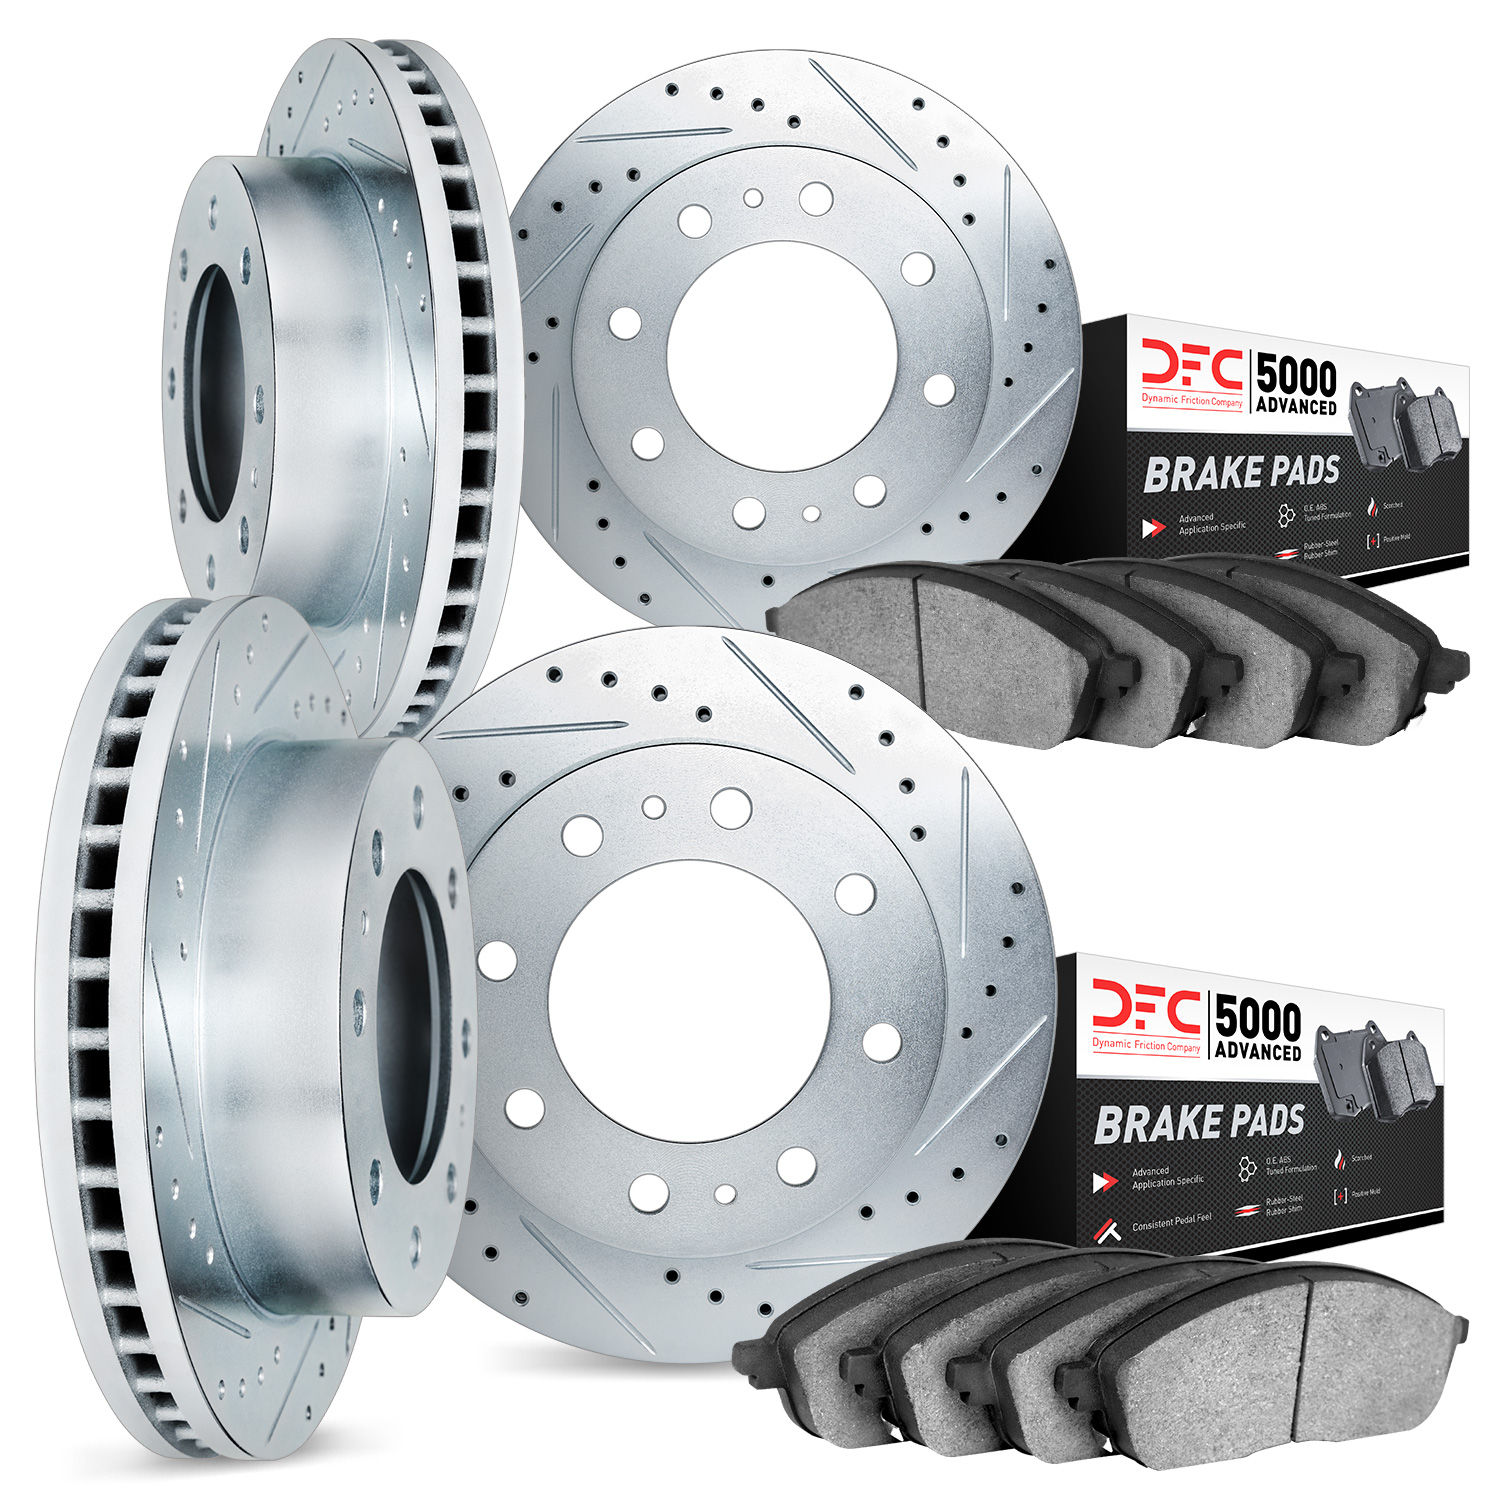 7504-46012 Drilled/Slotted Brake Rotors w/5000 Advanced Brake Pads Kit [Silver], 2000-2005 GM, Position: Front and Rear